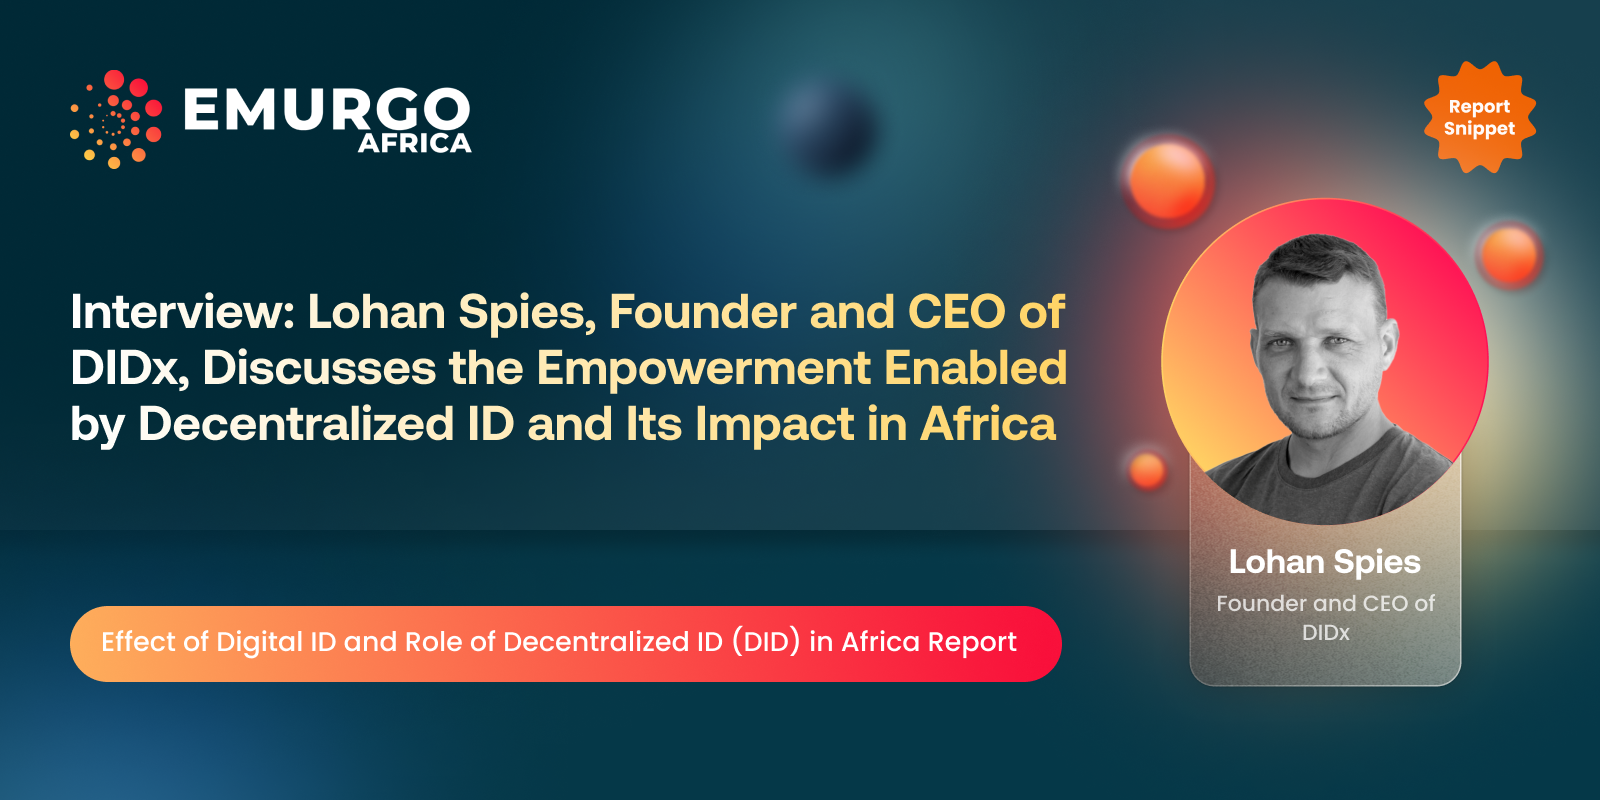 Interview: Lohan Spies, Founder and CEO of DIDx, Discusses the Empowerment Enabled by Decentralized ID and Its Impact in Africa